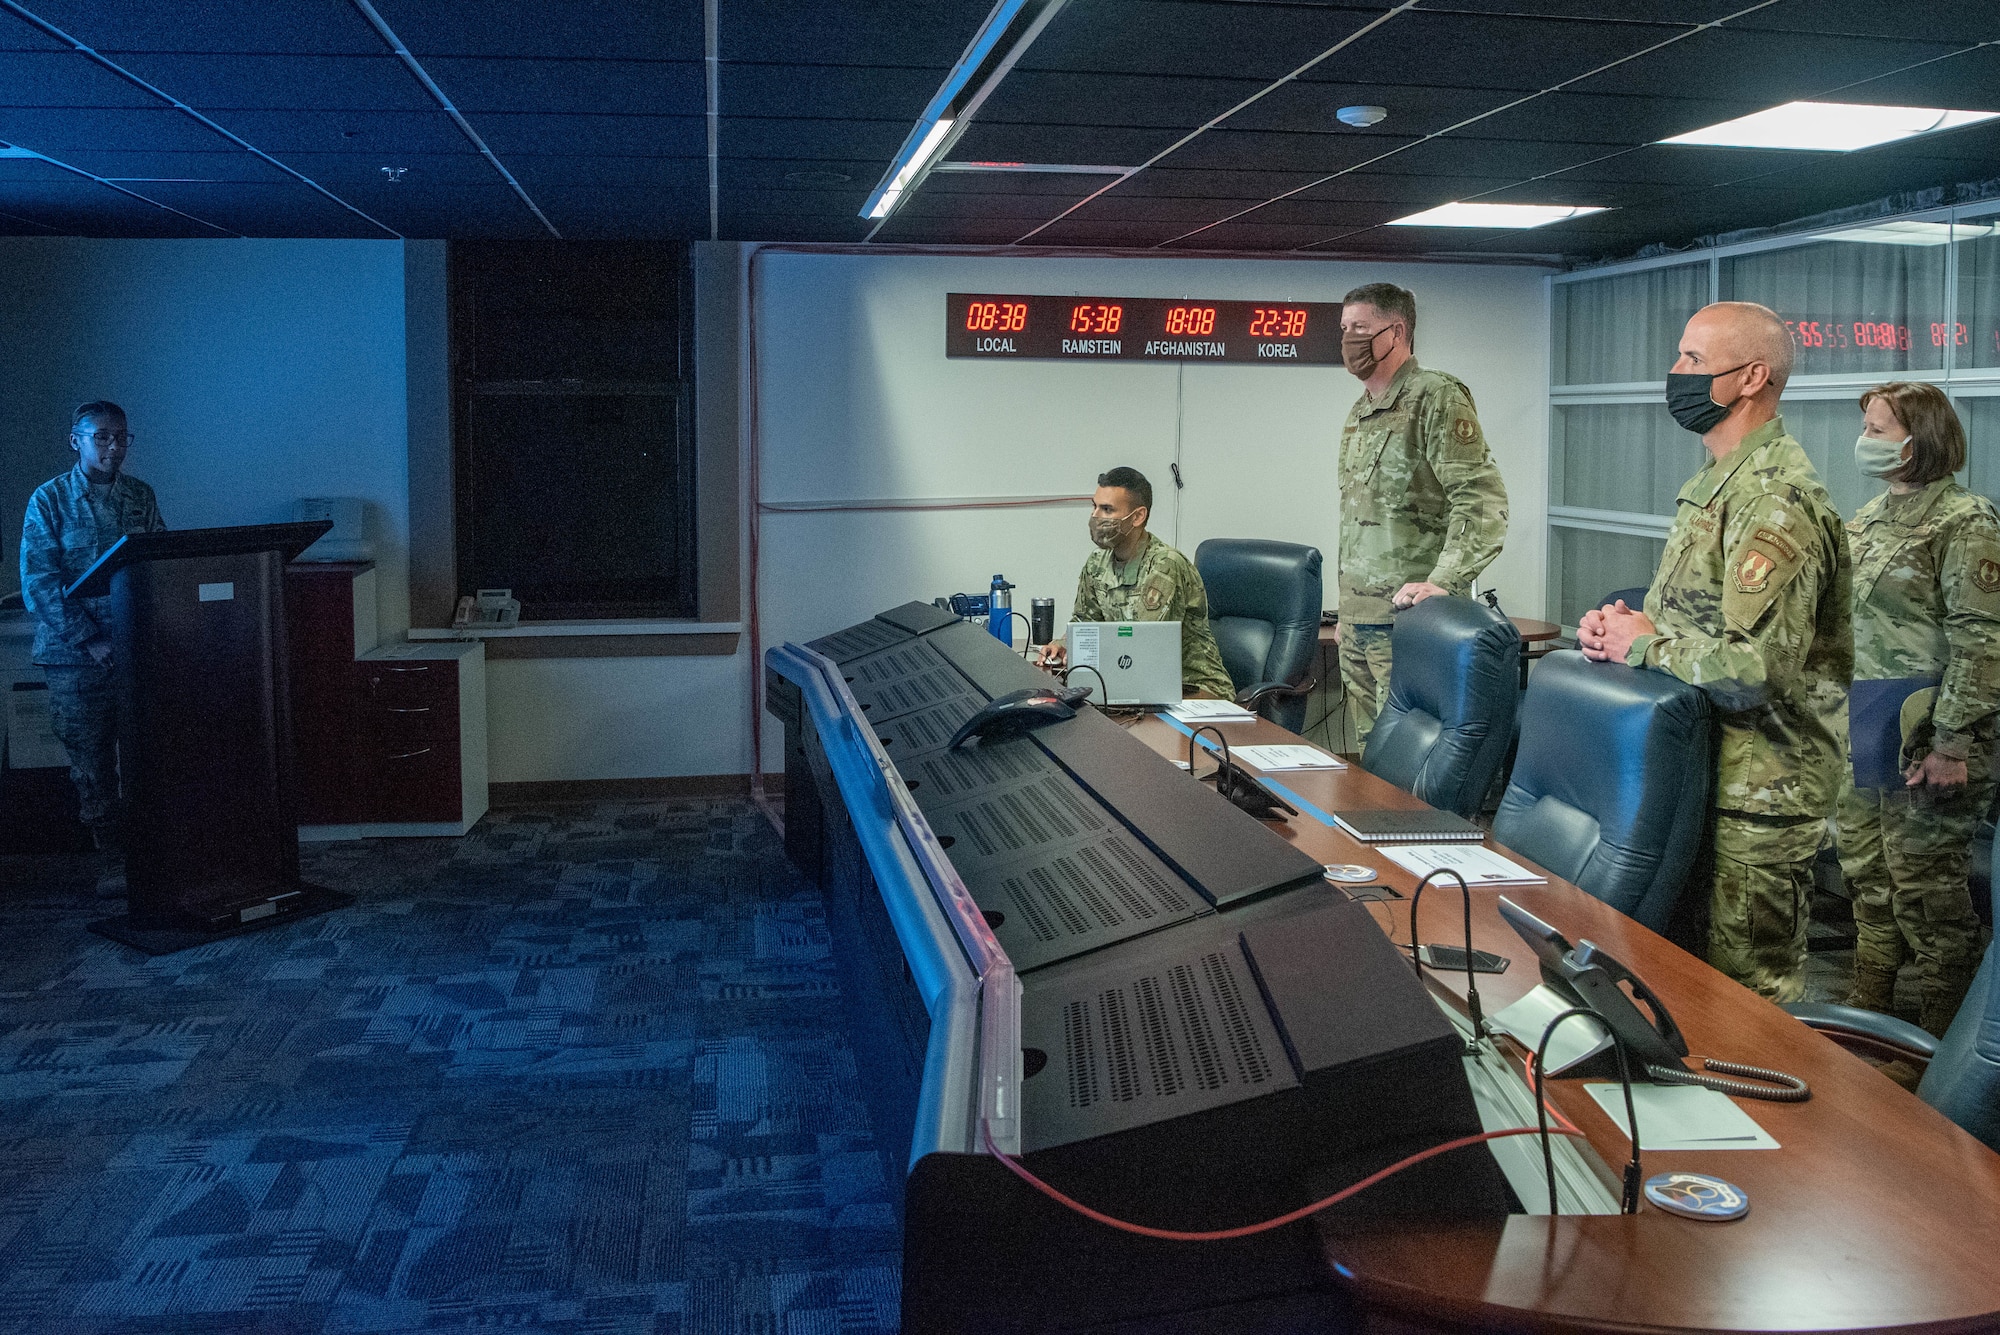 U.S. Air Force Lt. Gen. Gene Kirkland, Air Force Sustainment Center commander, and Chief Master Sgt. David Flosi, AFSC command chief visited the 635th Supply Chain Operations Wing at Scott AFB, Ill on Oct. 19.